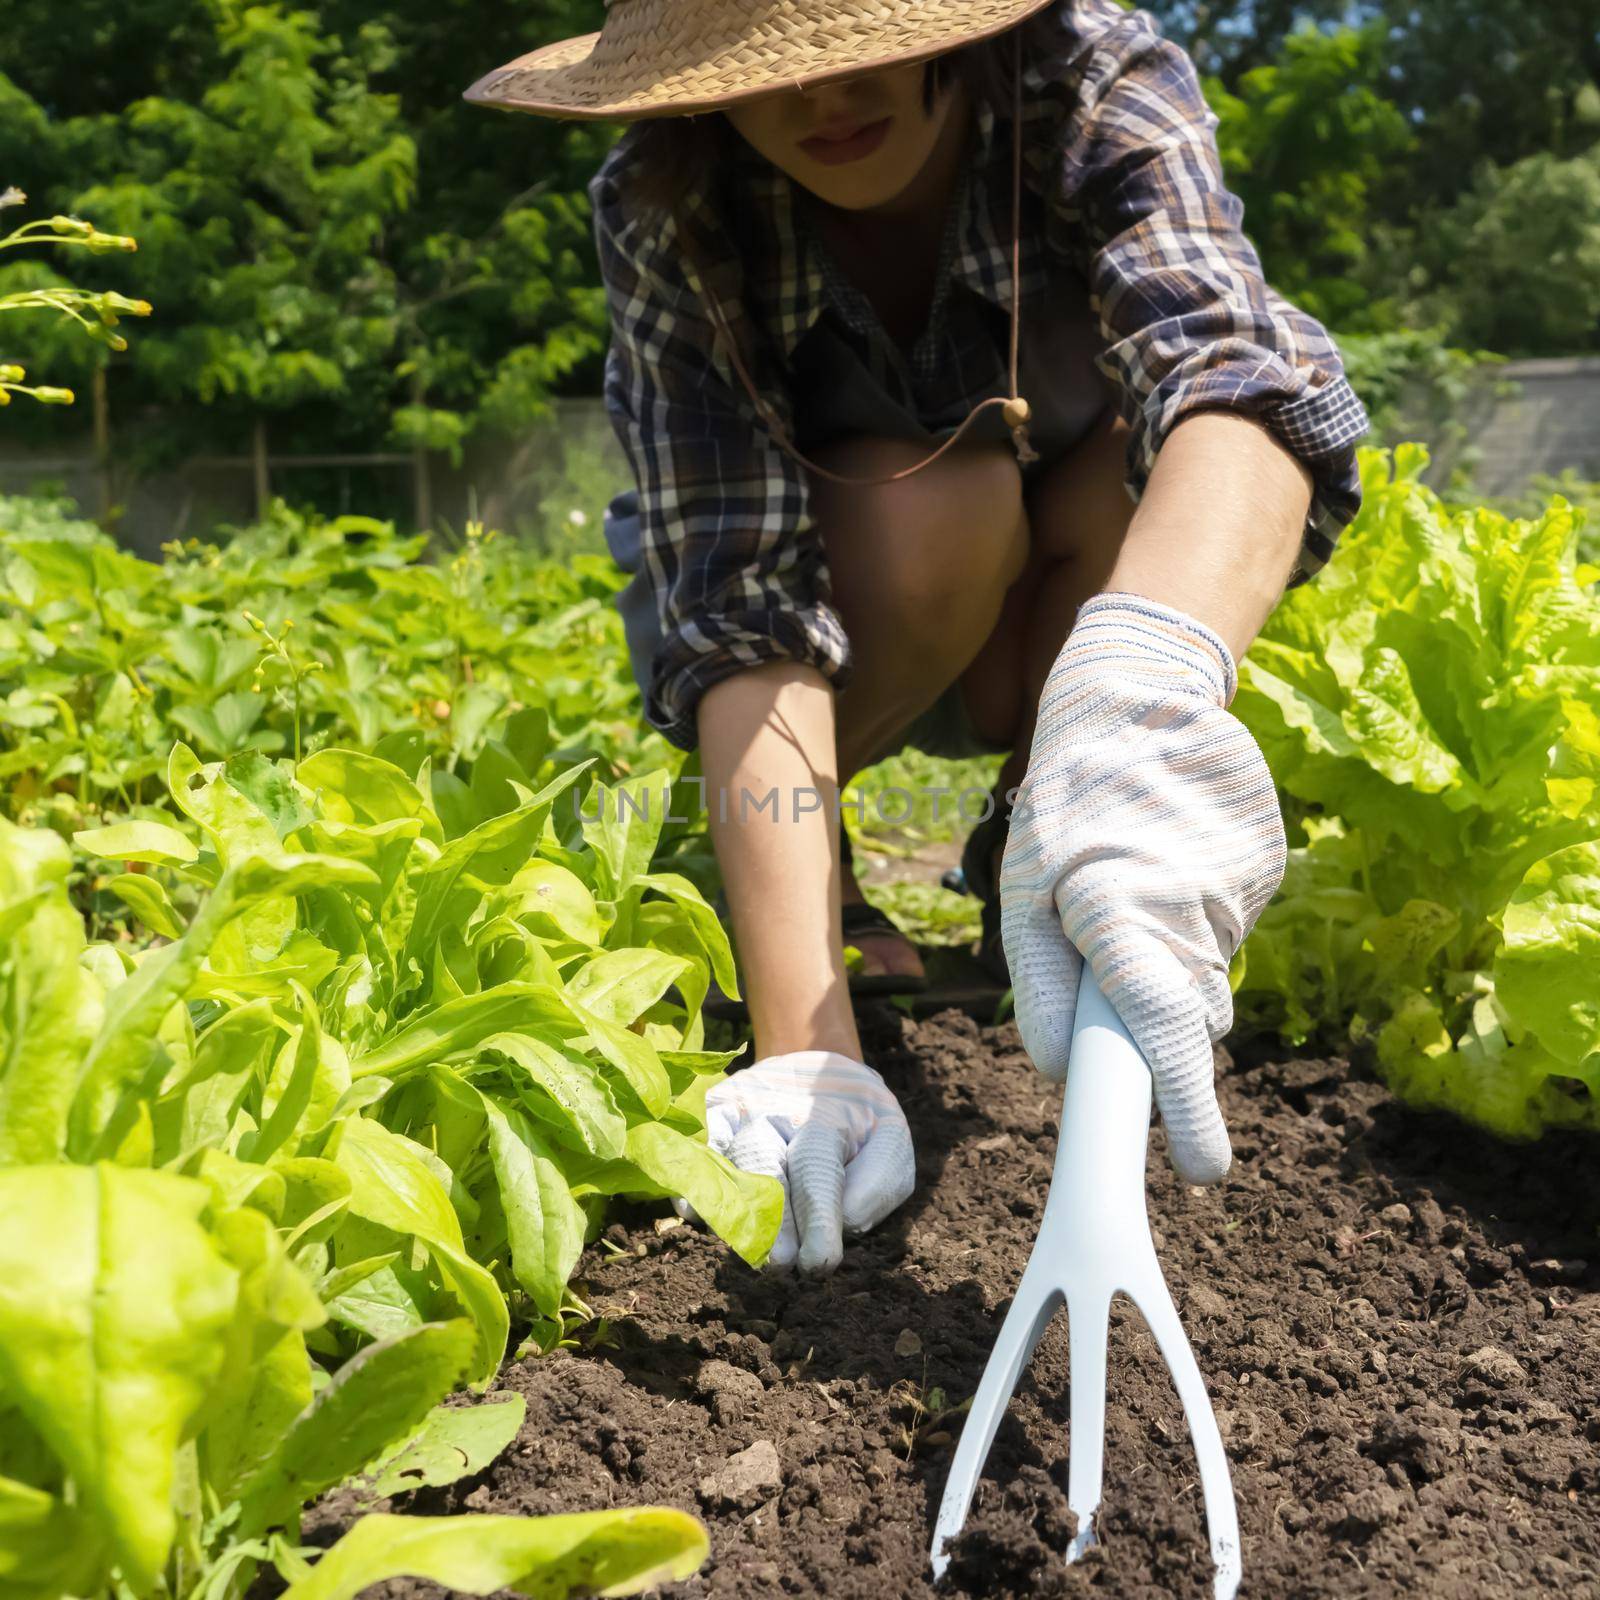 A young girl in a straw hat and gloves prepares the soil in the garden. by africapink